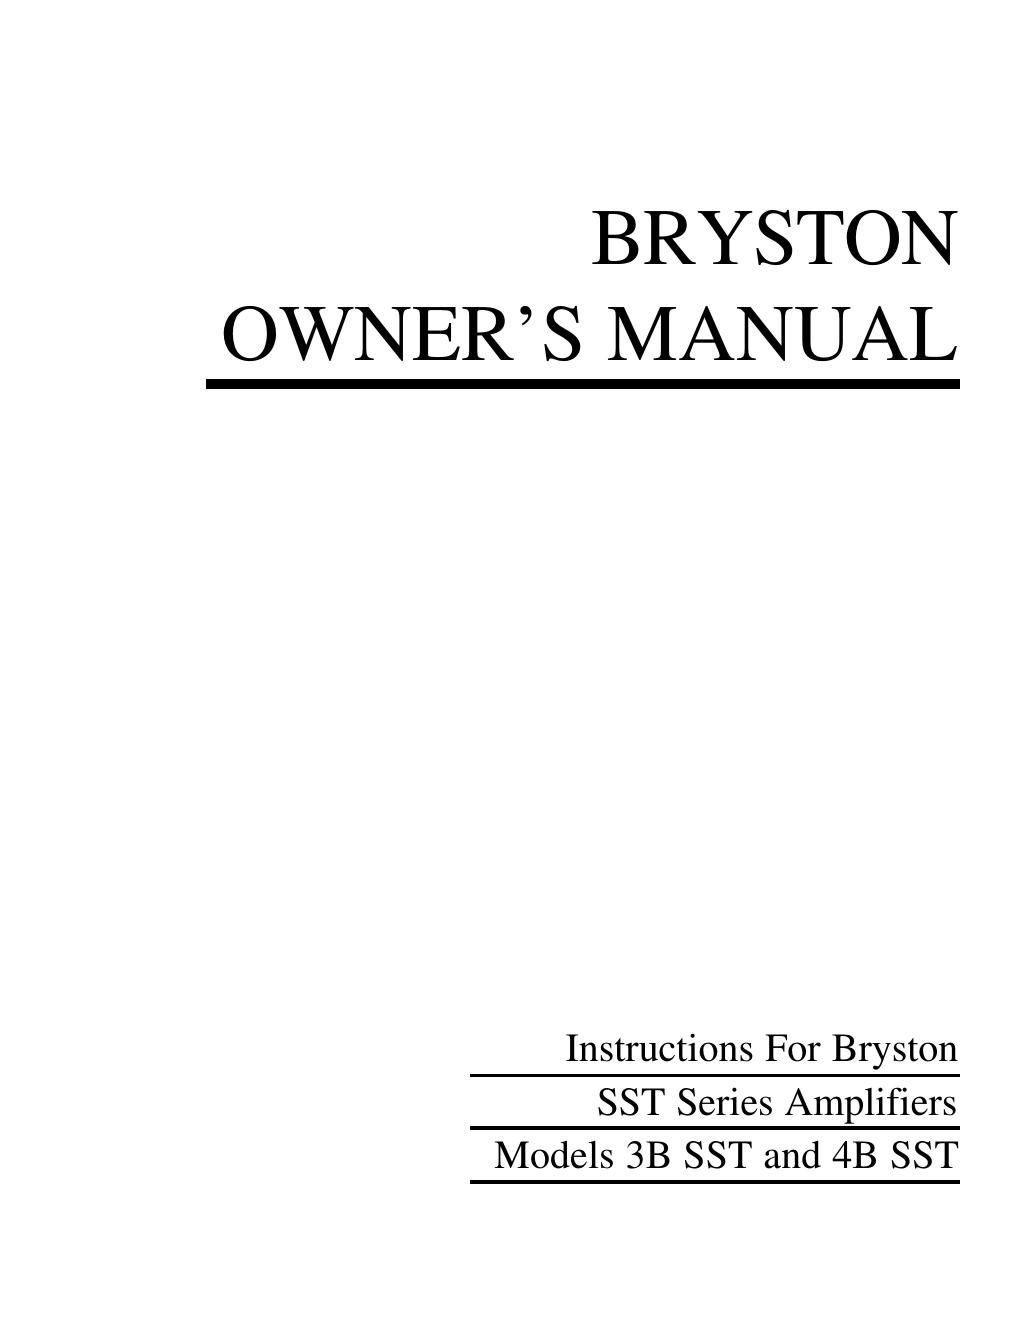 bryston 4 bsst owners manual